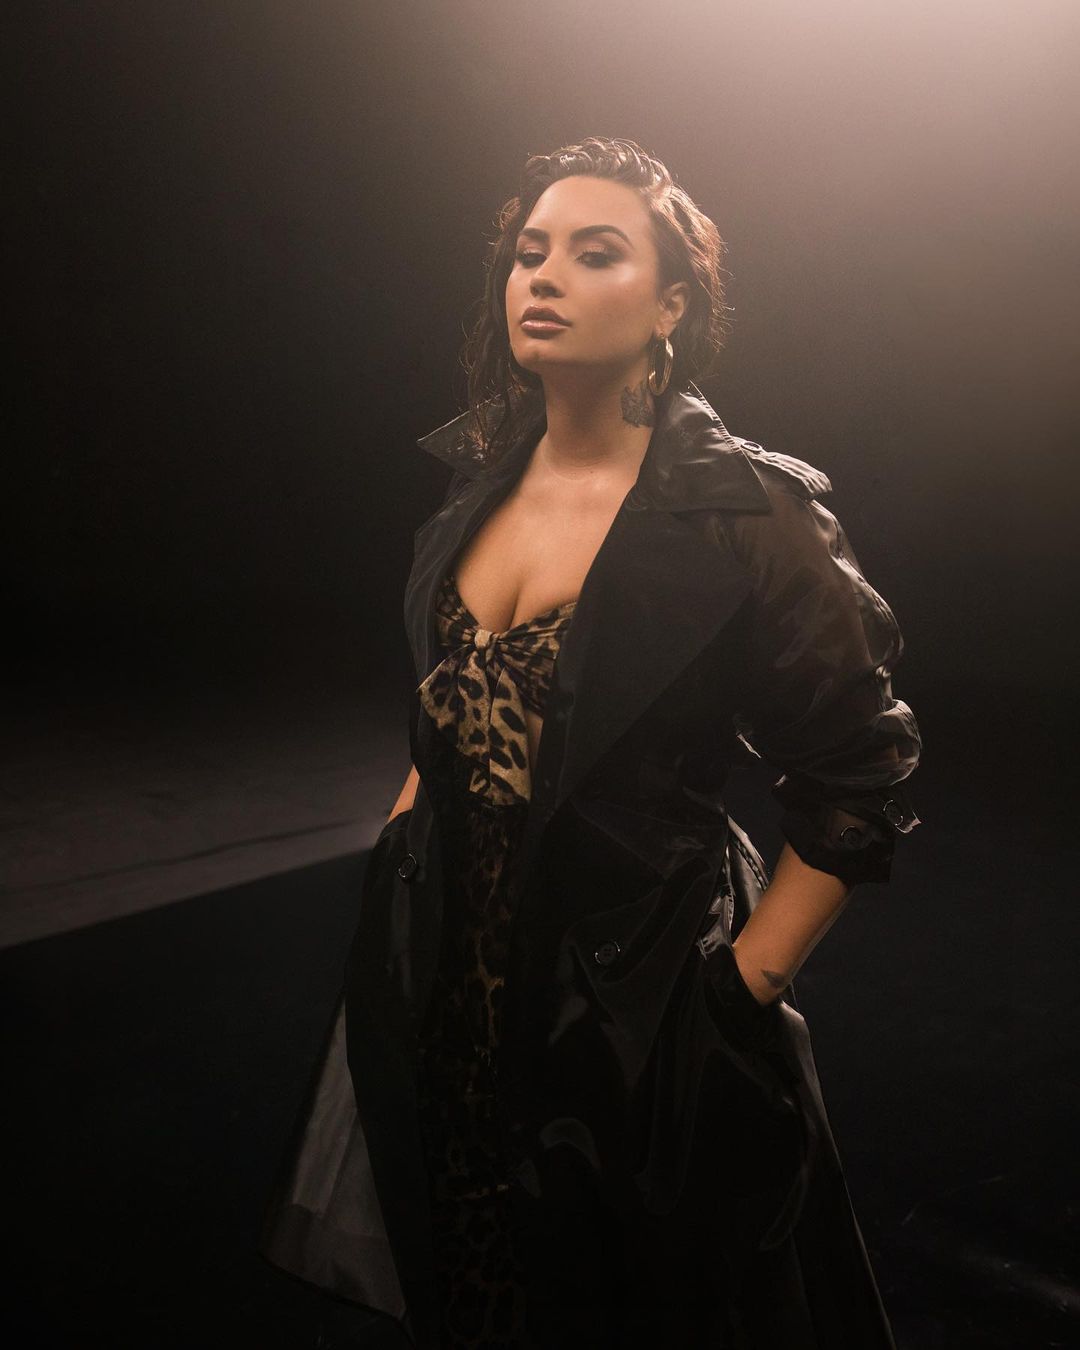 Demi Lovato - Biography, Profile, Facts and Career